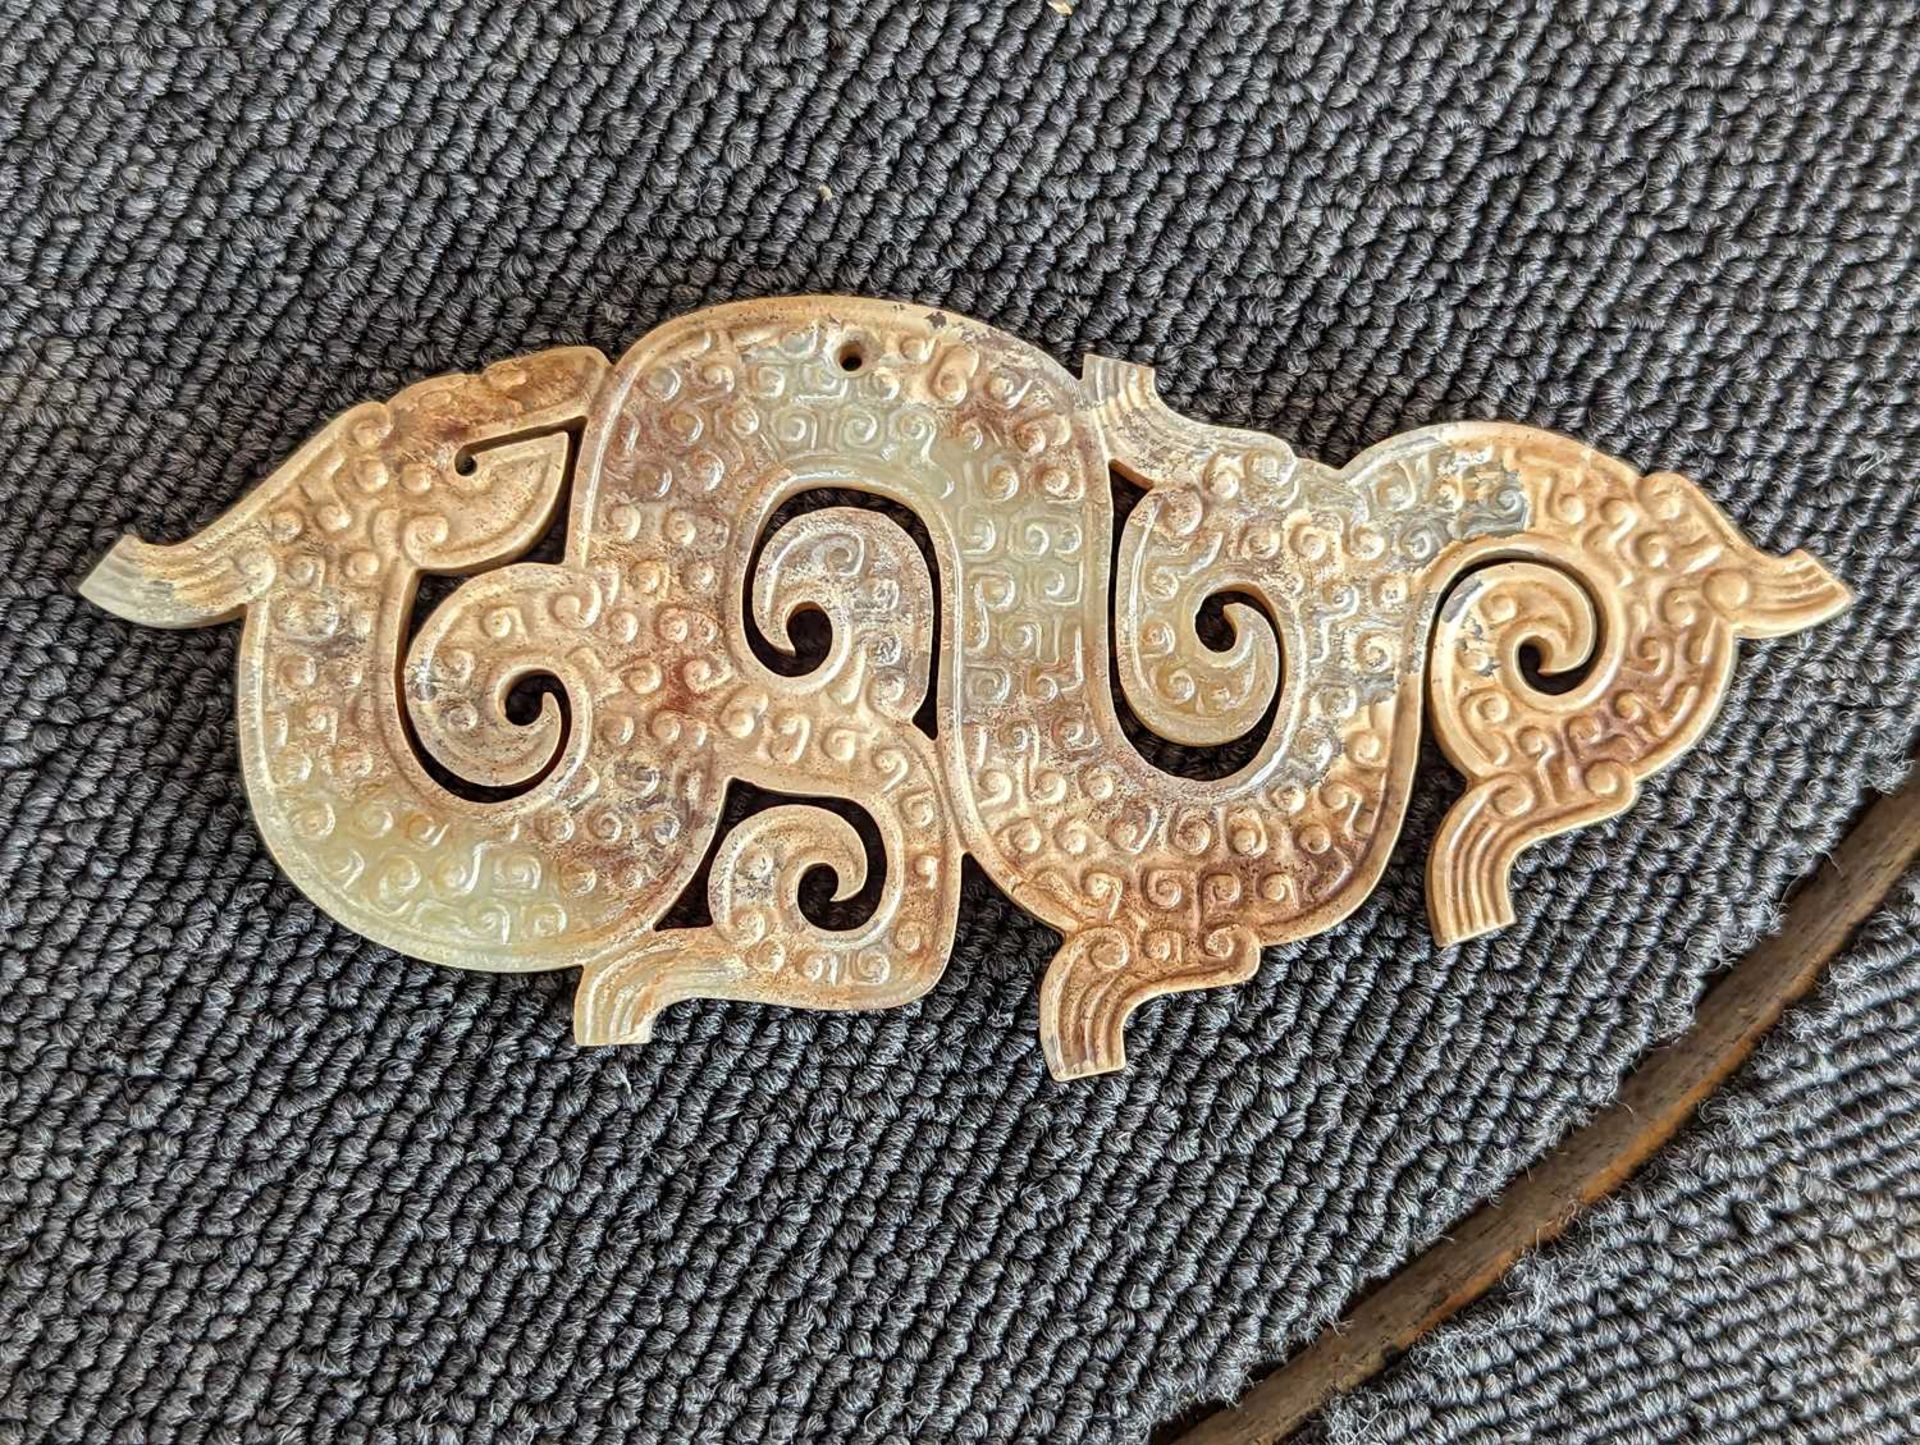 DRAGON-SHAPED PENDANT WITH CIRRUS CLOUD STRIPES - Image 6 of 27